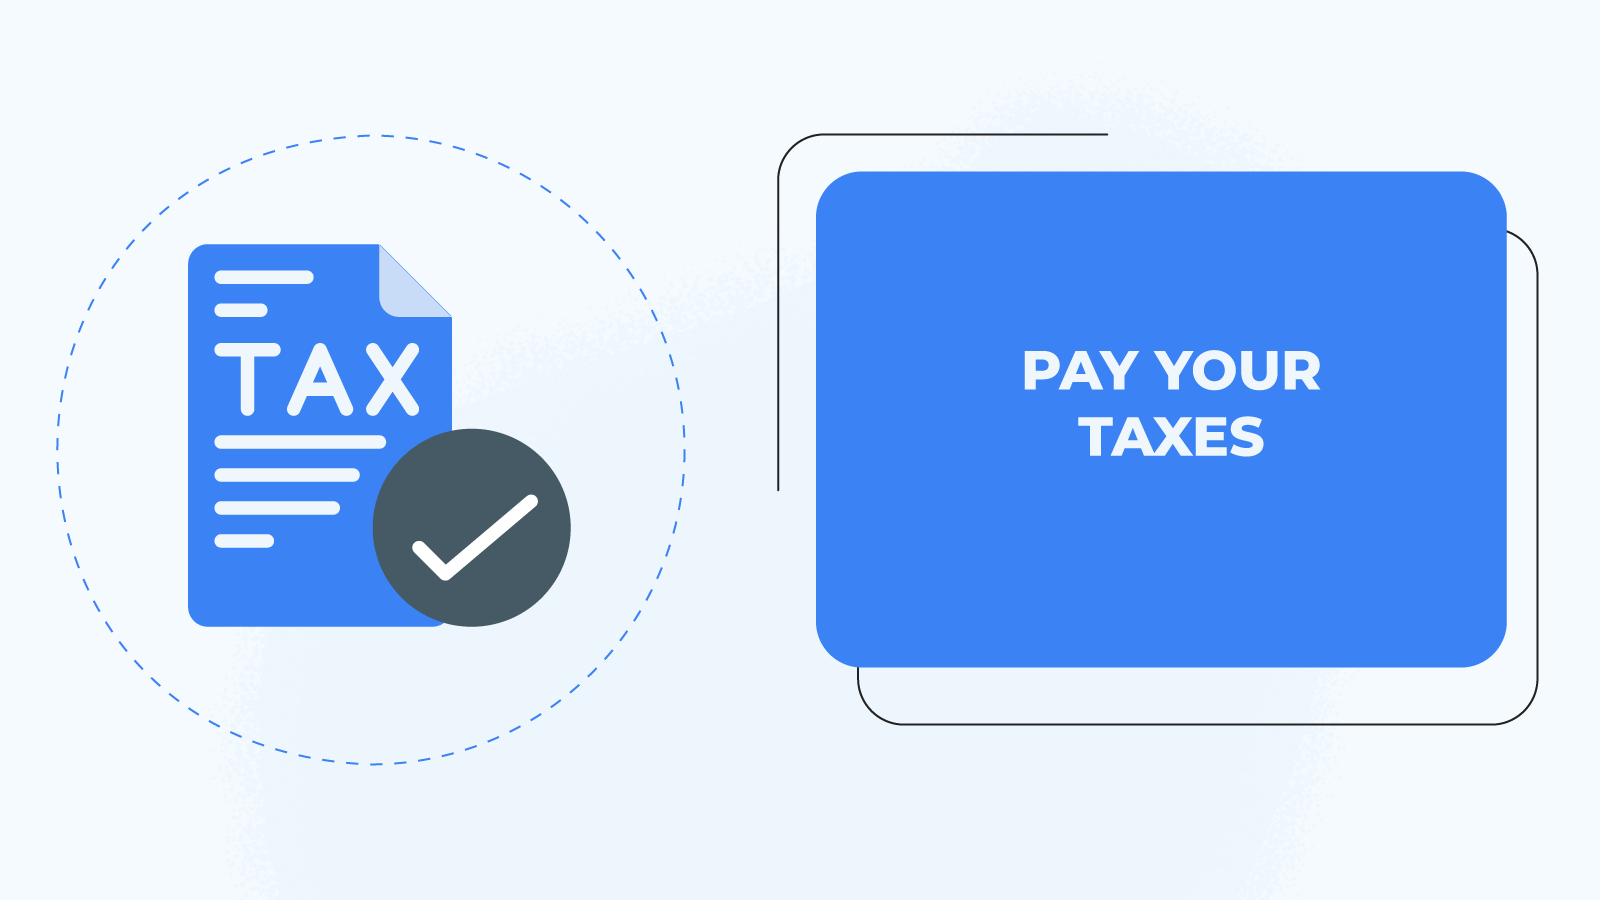 Pay your taxes